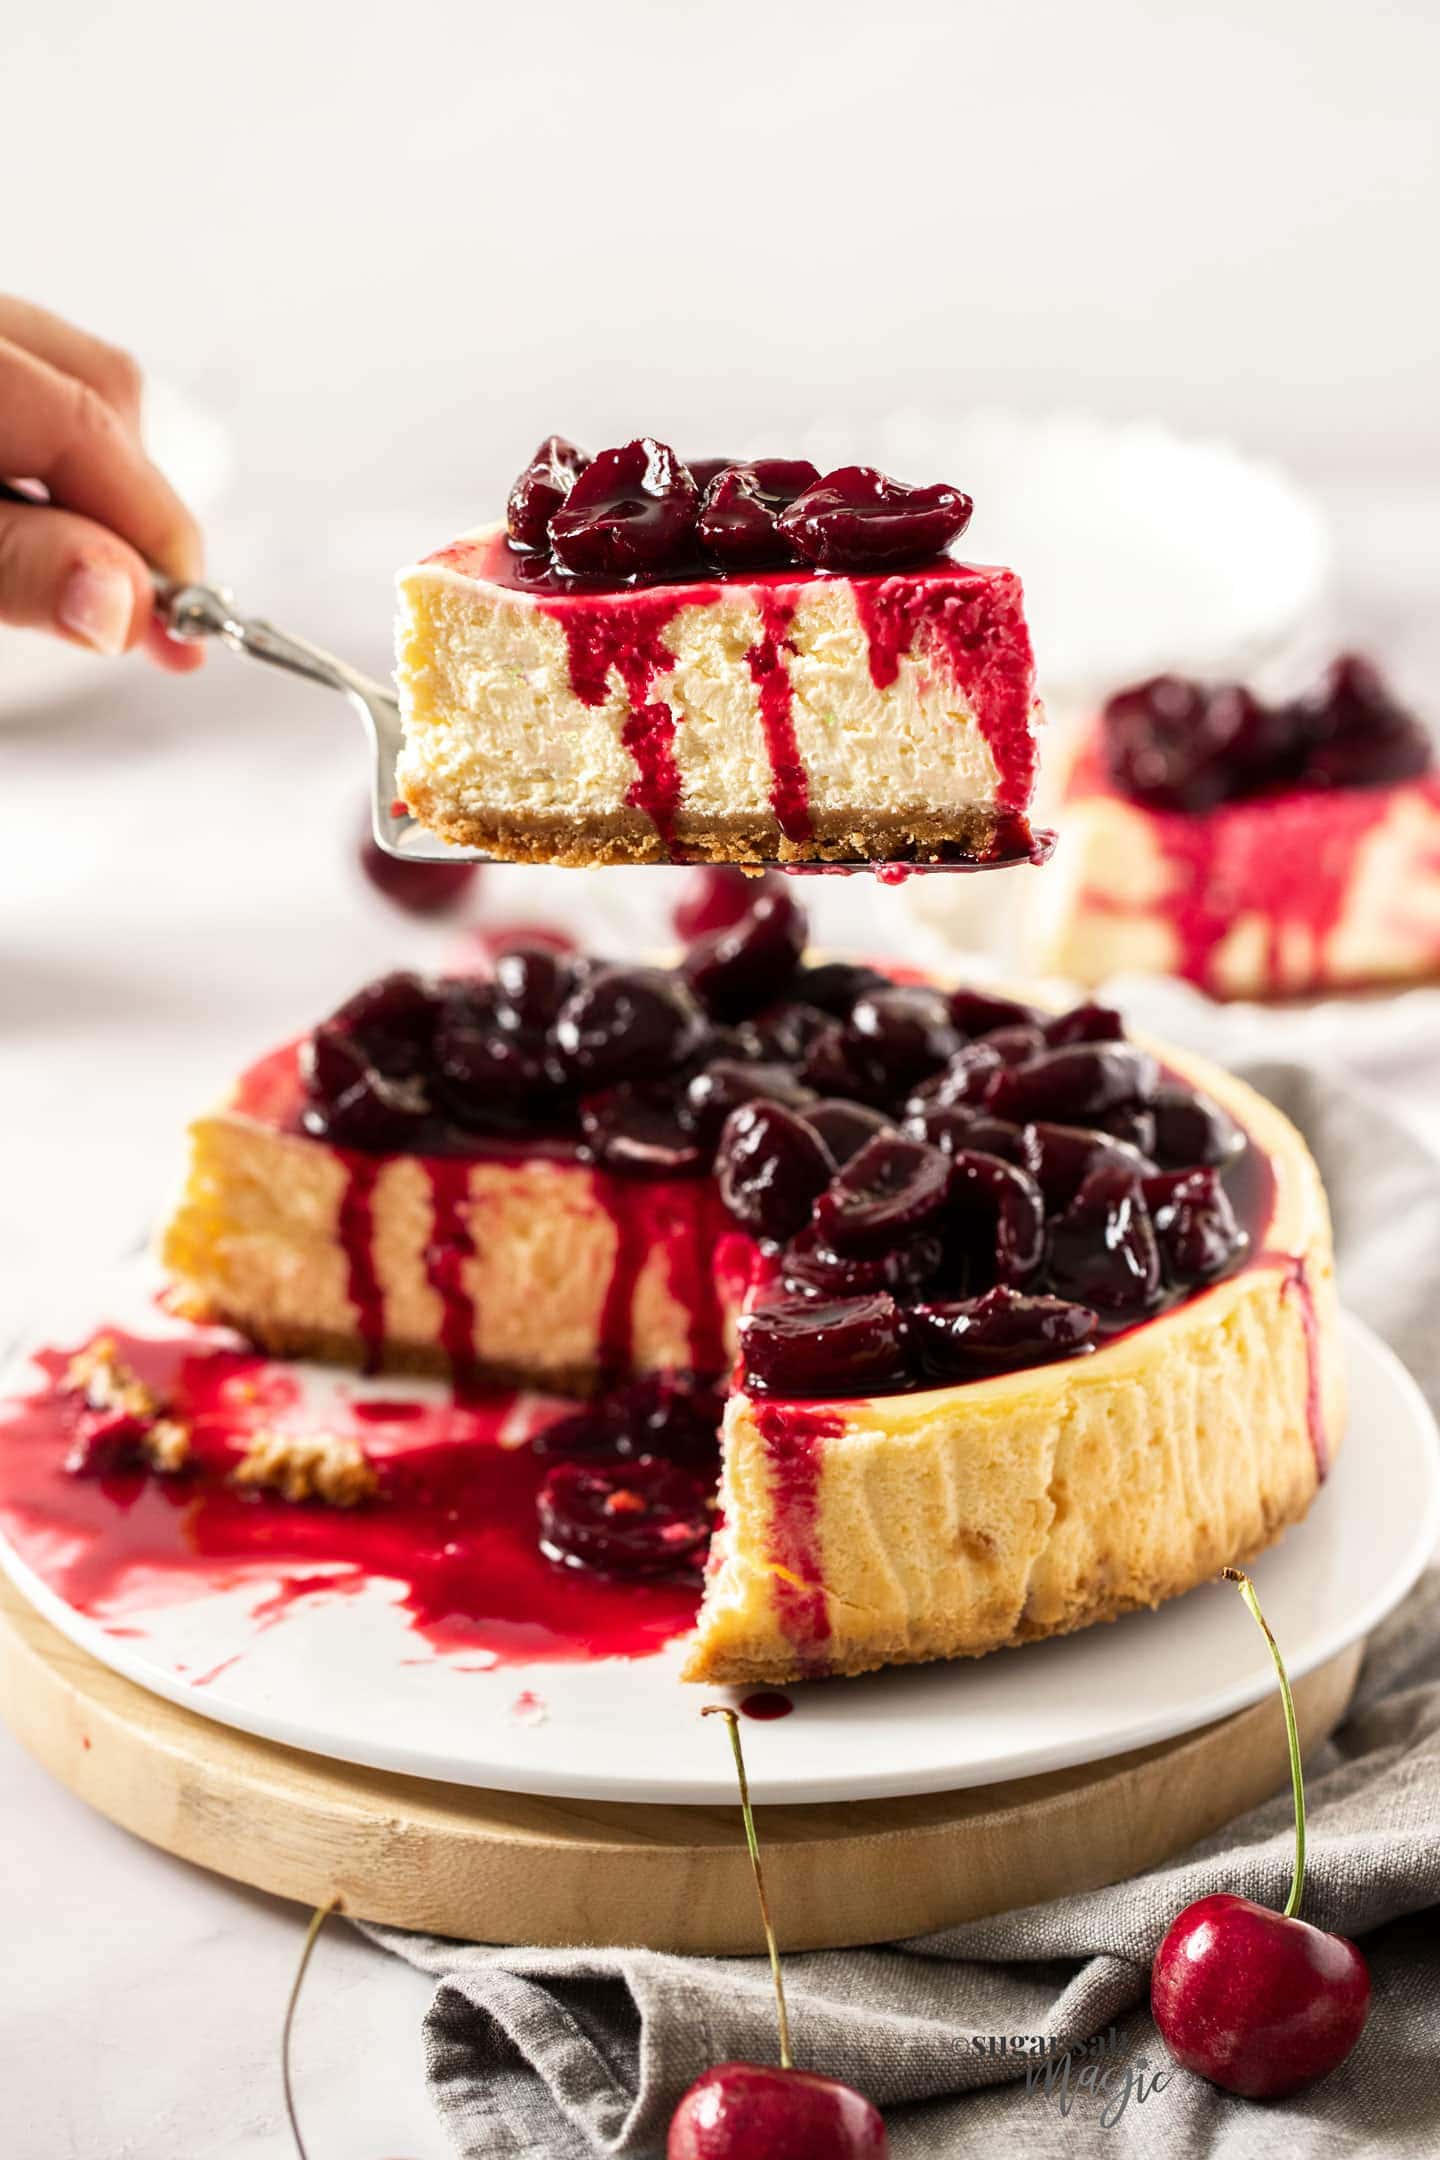 A slice of cherry cheesecake being held on a cake slice.